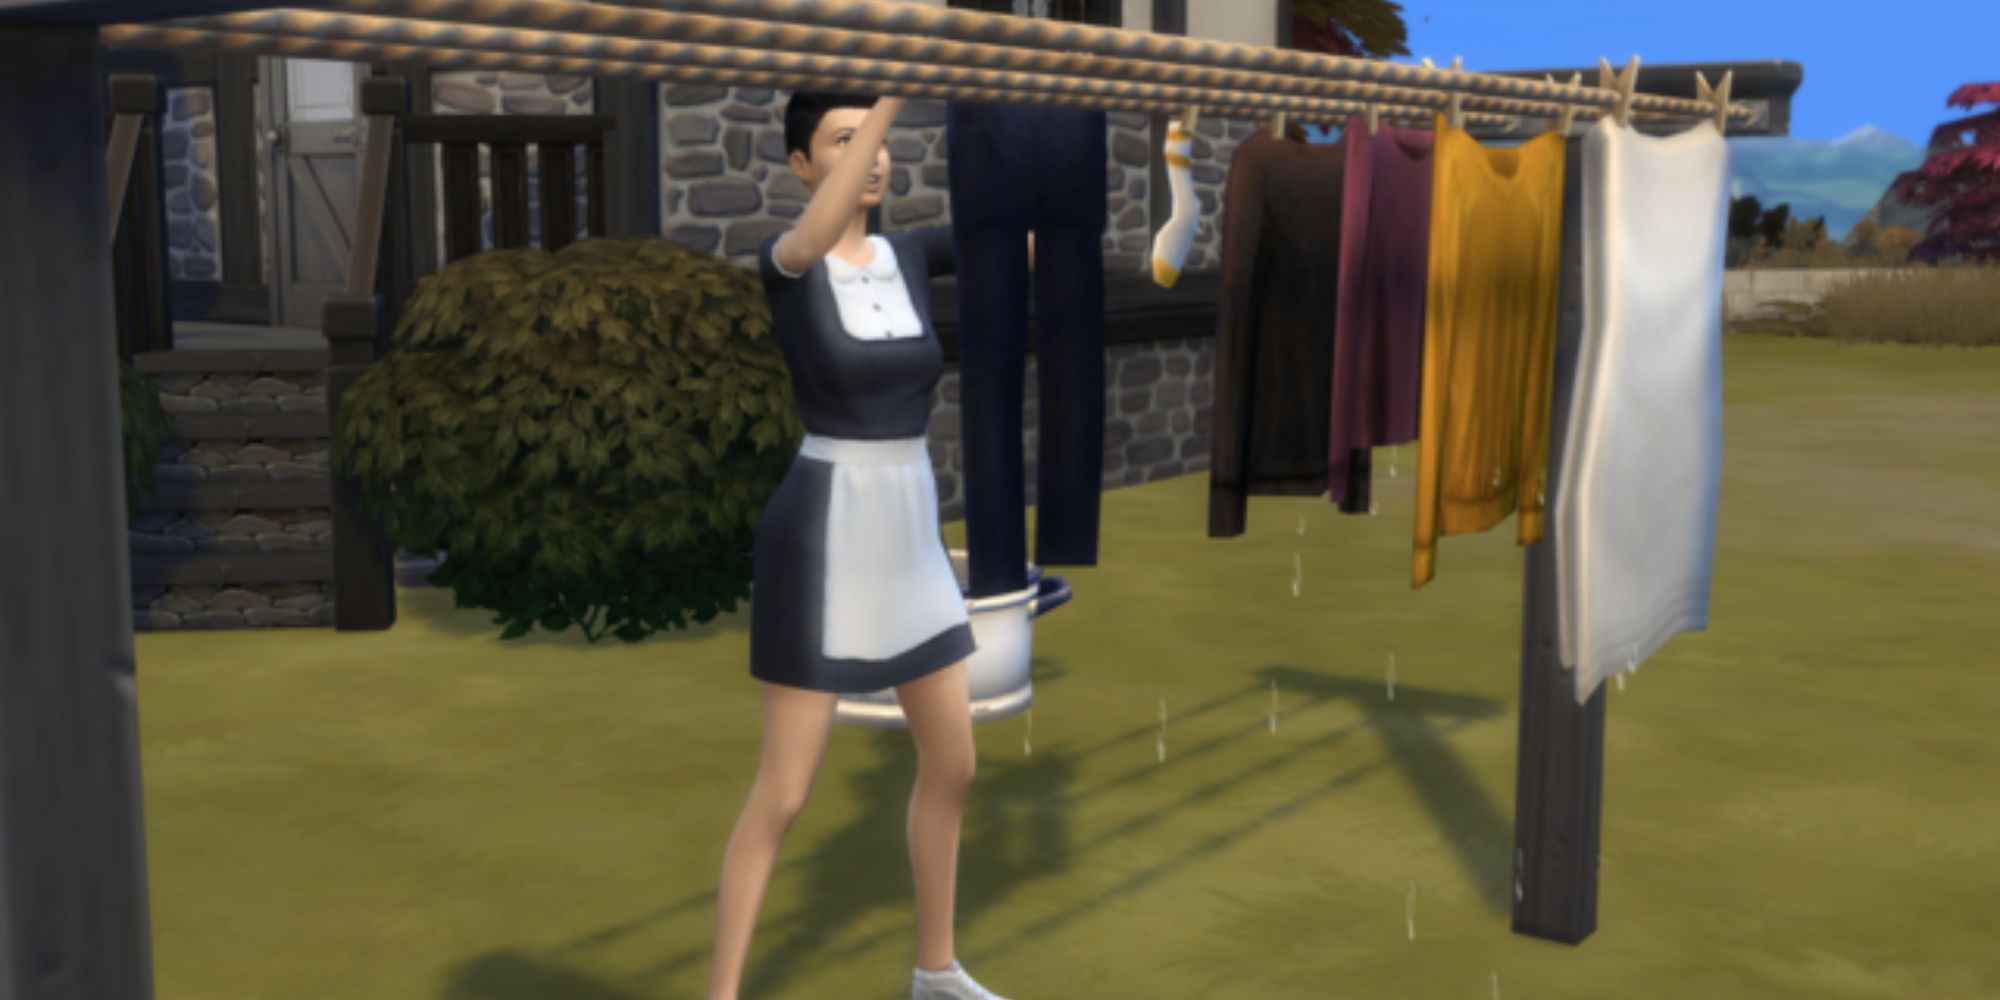 The Sims 4 Maid Doing Laundry